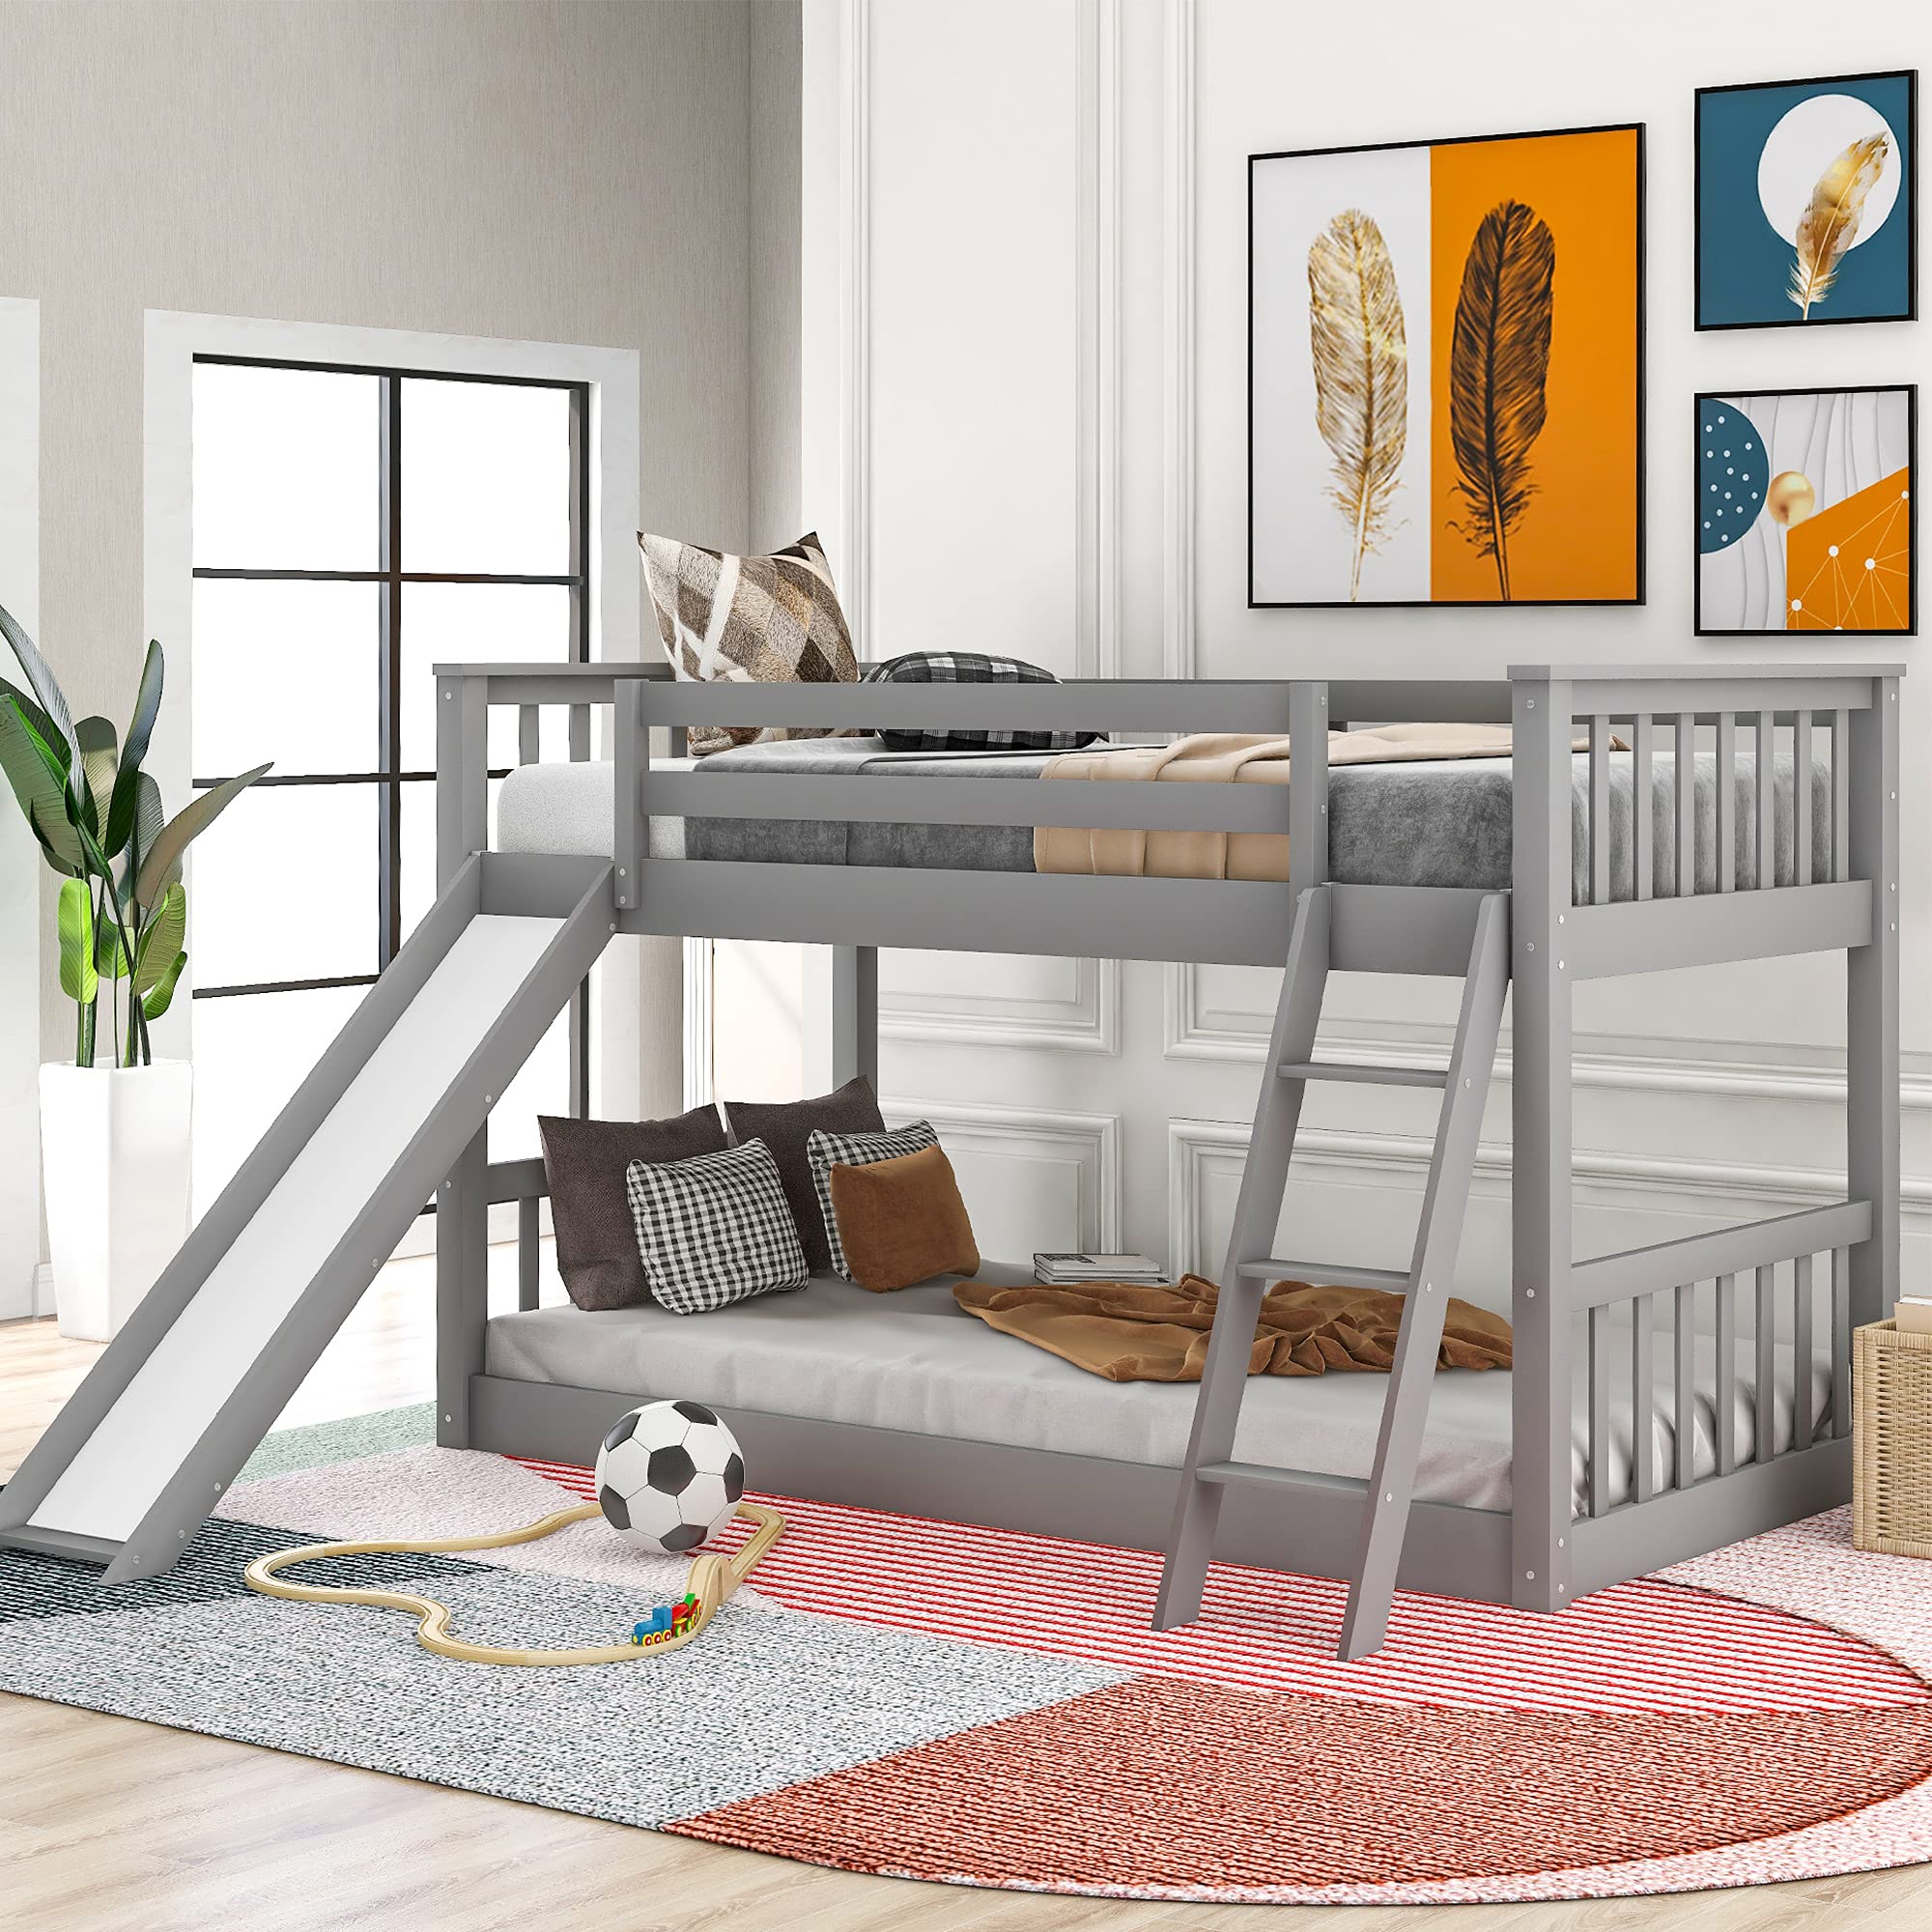 Bellemave Wooden Bunk Beds for Girls Boys, Twin Over Twin Bunk Bed with Slide, Low Bunk Bed with Slide for Kids, Bunk Beds with 